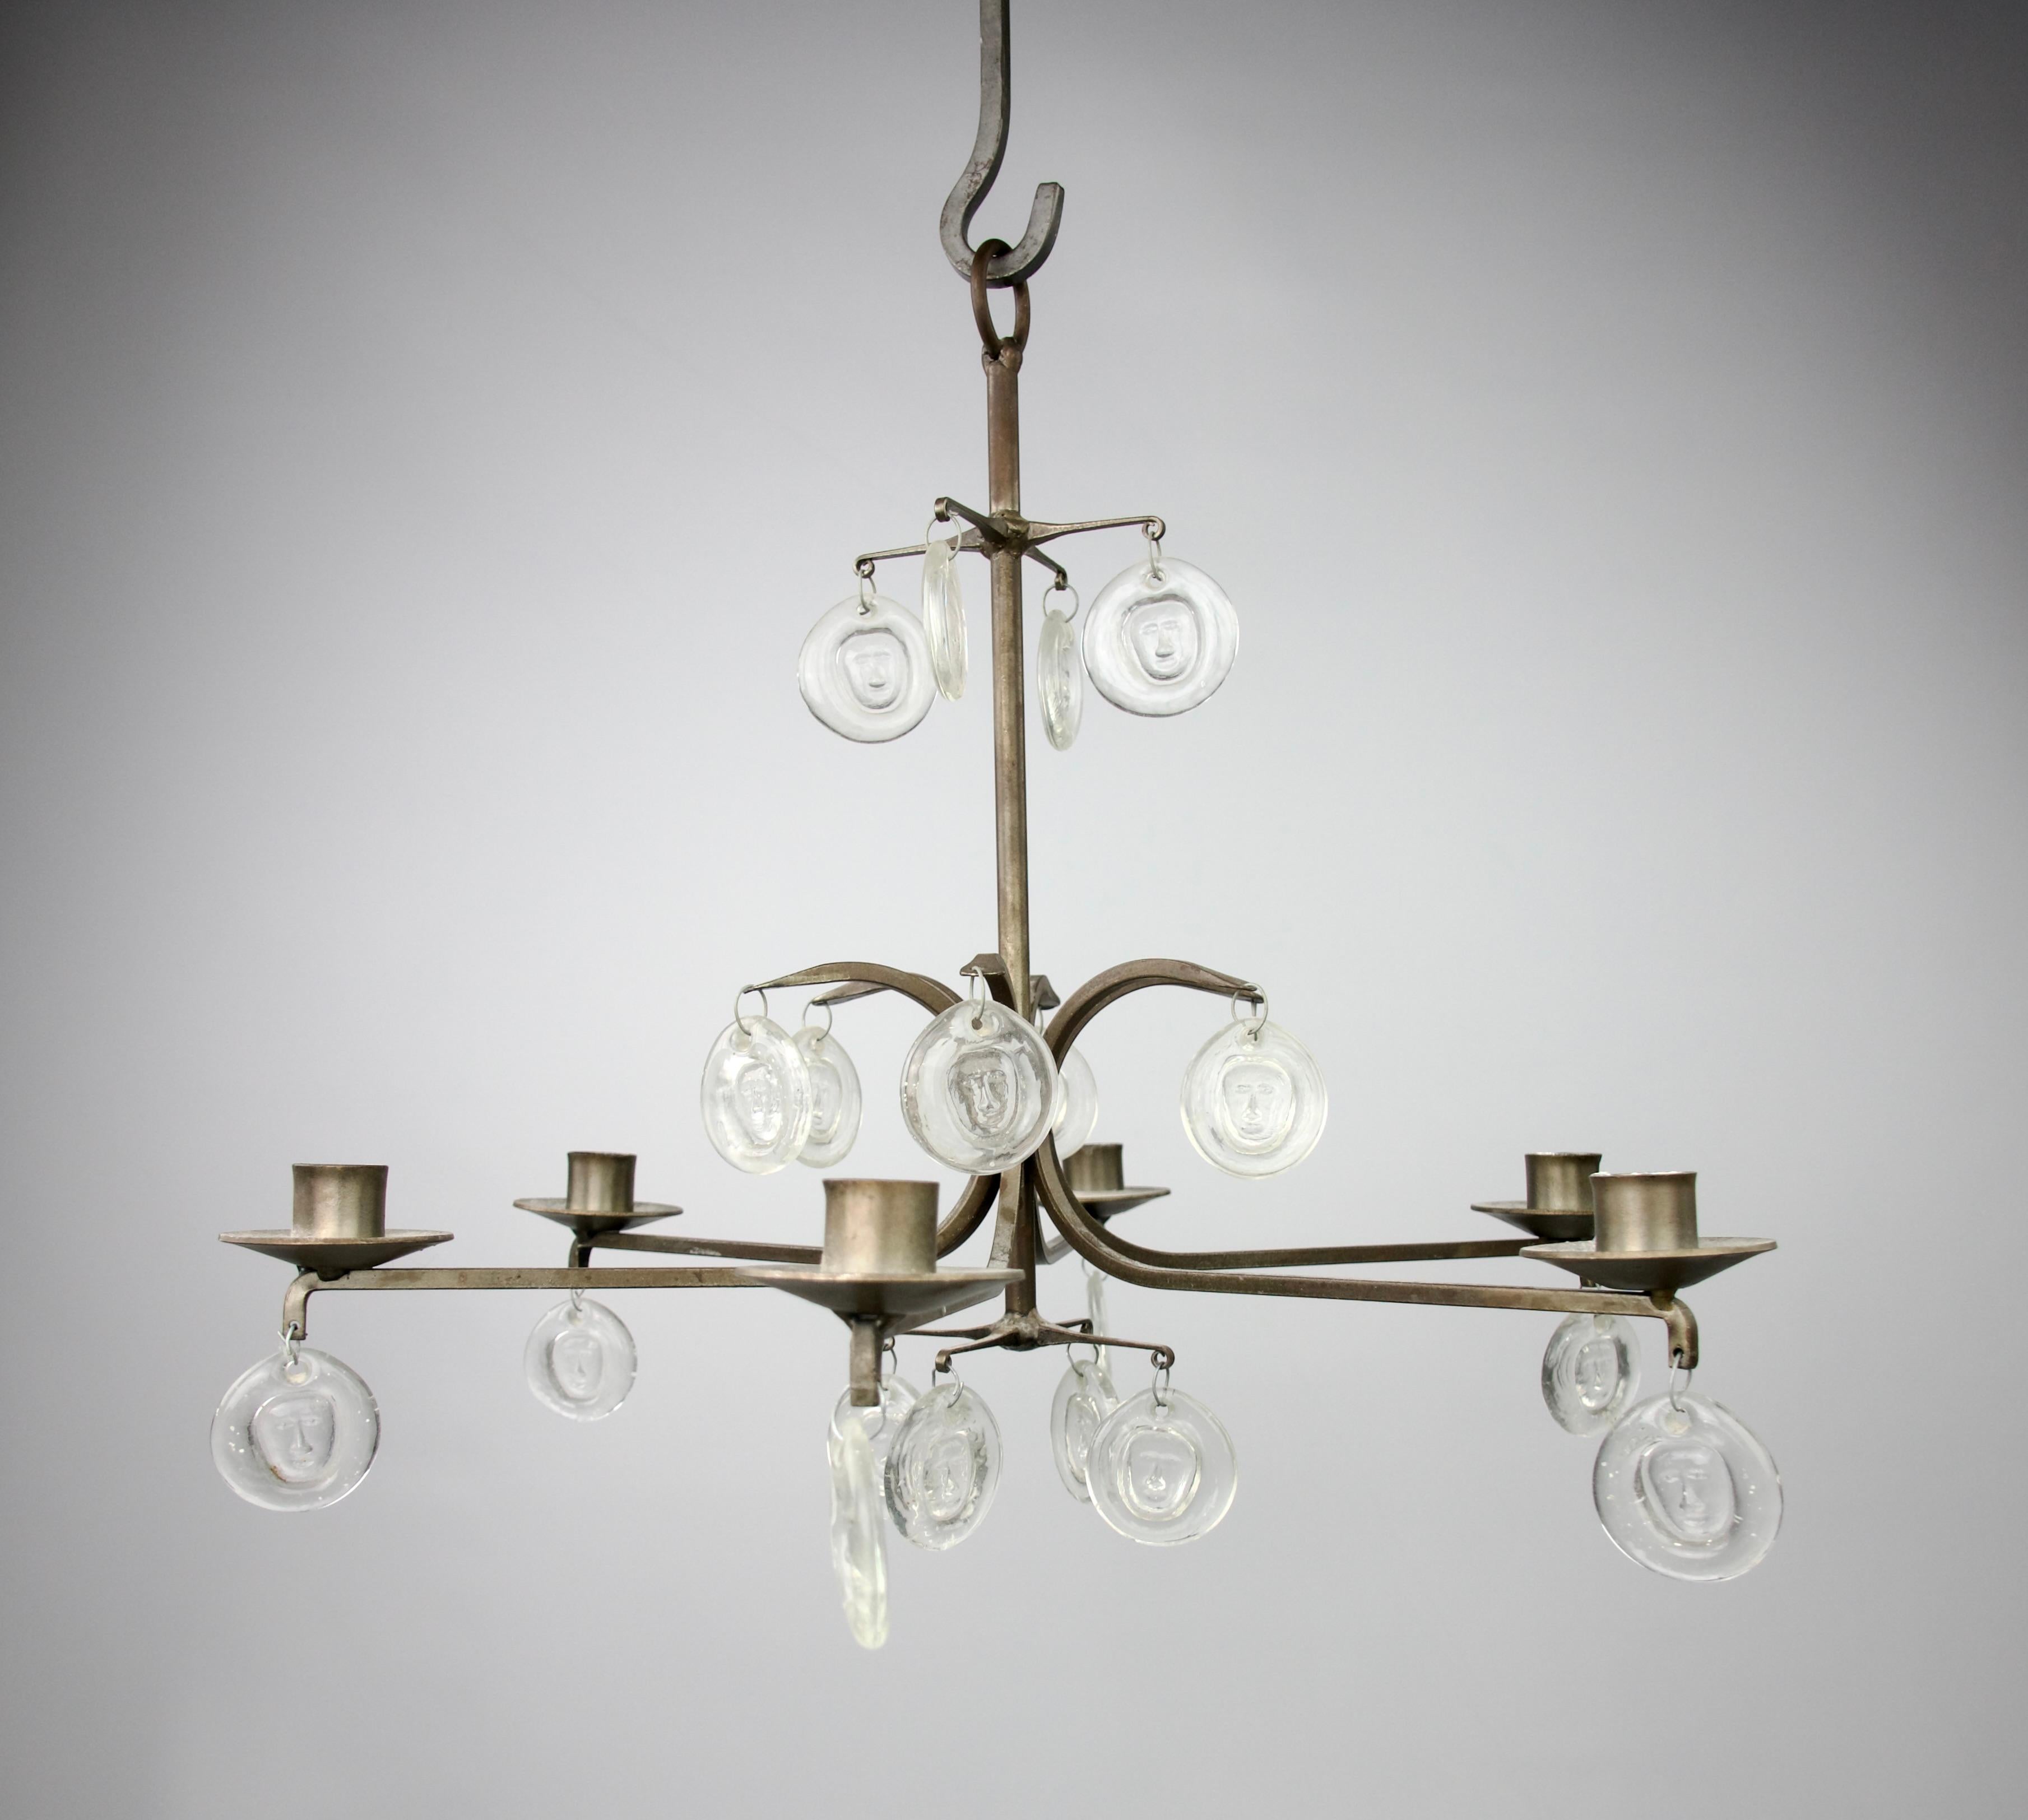 Superb six-armed chandelier by Erik Sylvester Höglund for Kosta Boda, Sweden 1965. Decorations of two sided pressed-glass face pendants.

In very good condition. Slight signs of use.

Dimensions in cm ( H x D ) : 43 x 50

Secure shipping.